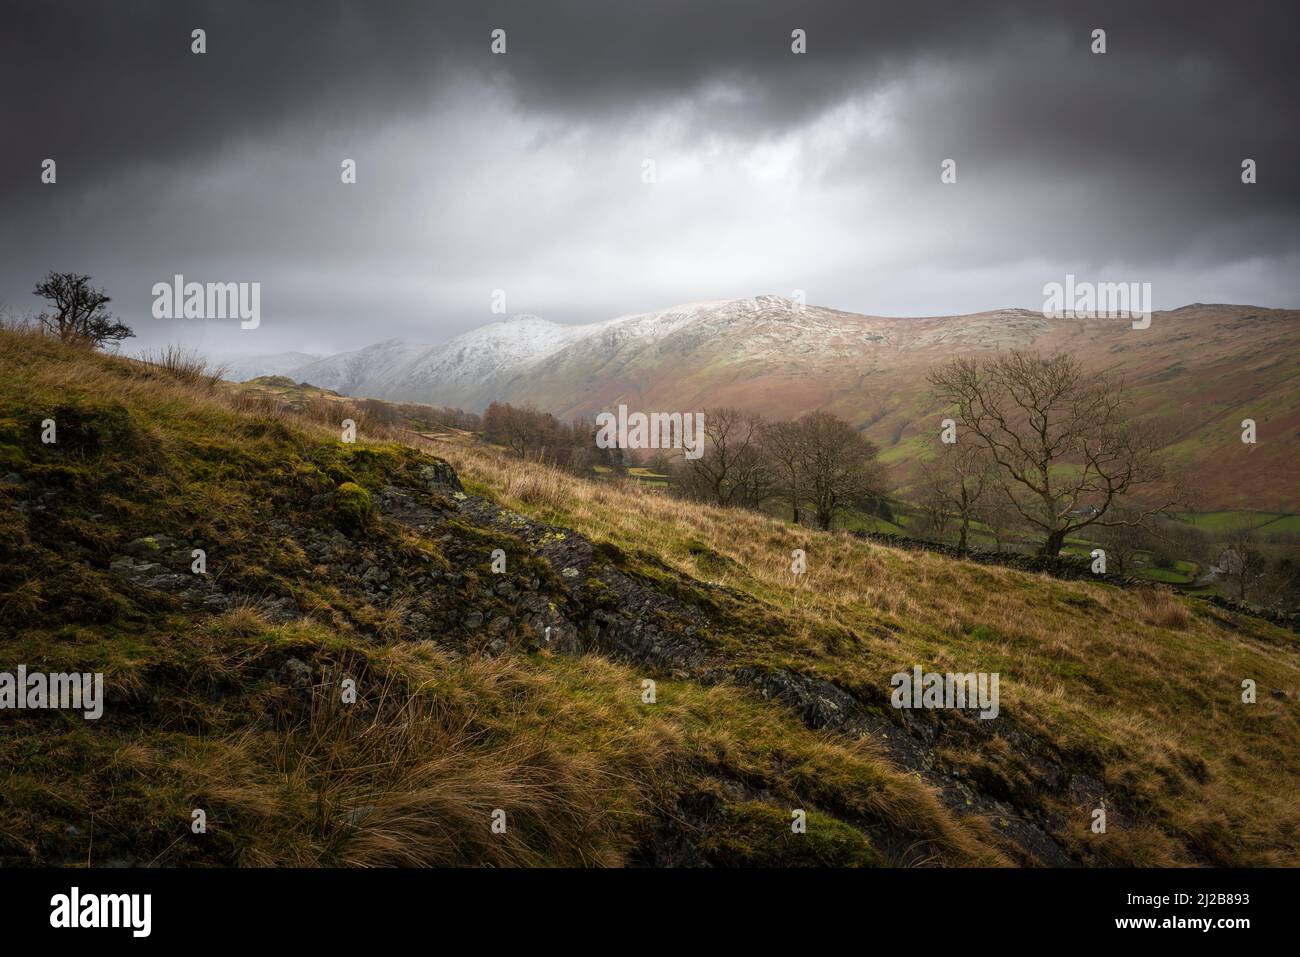 The snow-capped peaks of Ill Bell and Yoke above the Trout Beck Valley from Nanny Lane in late winter in the Lake District National Park, Cumbria, England. Stock Photo